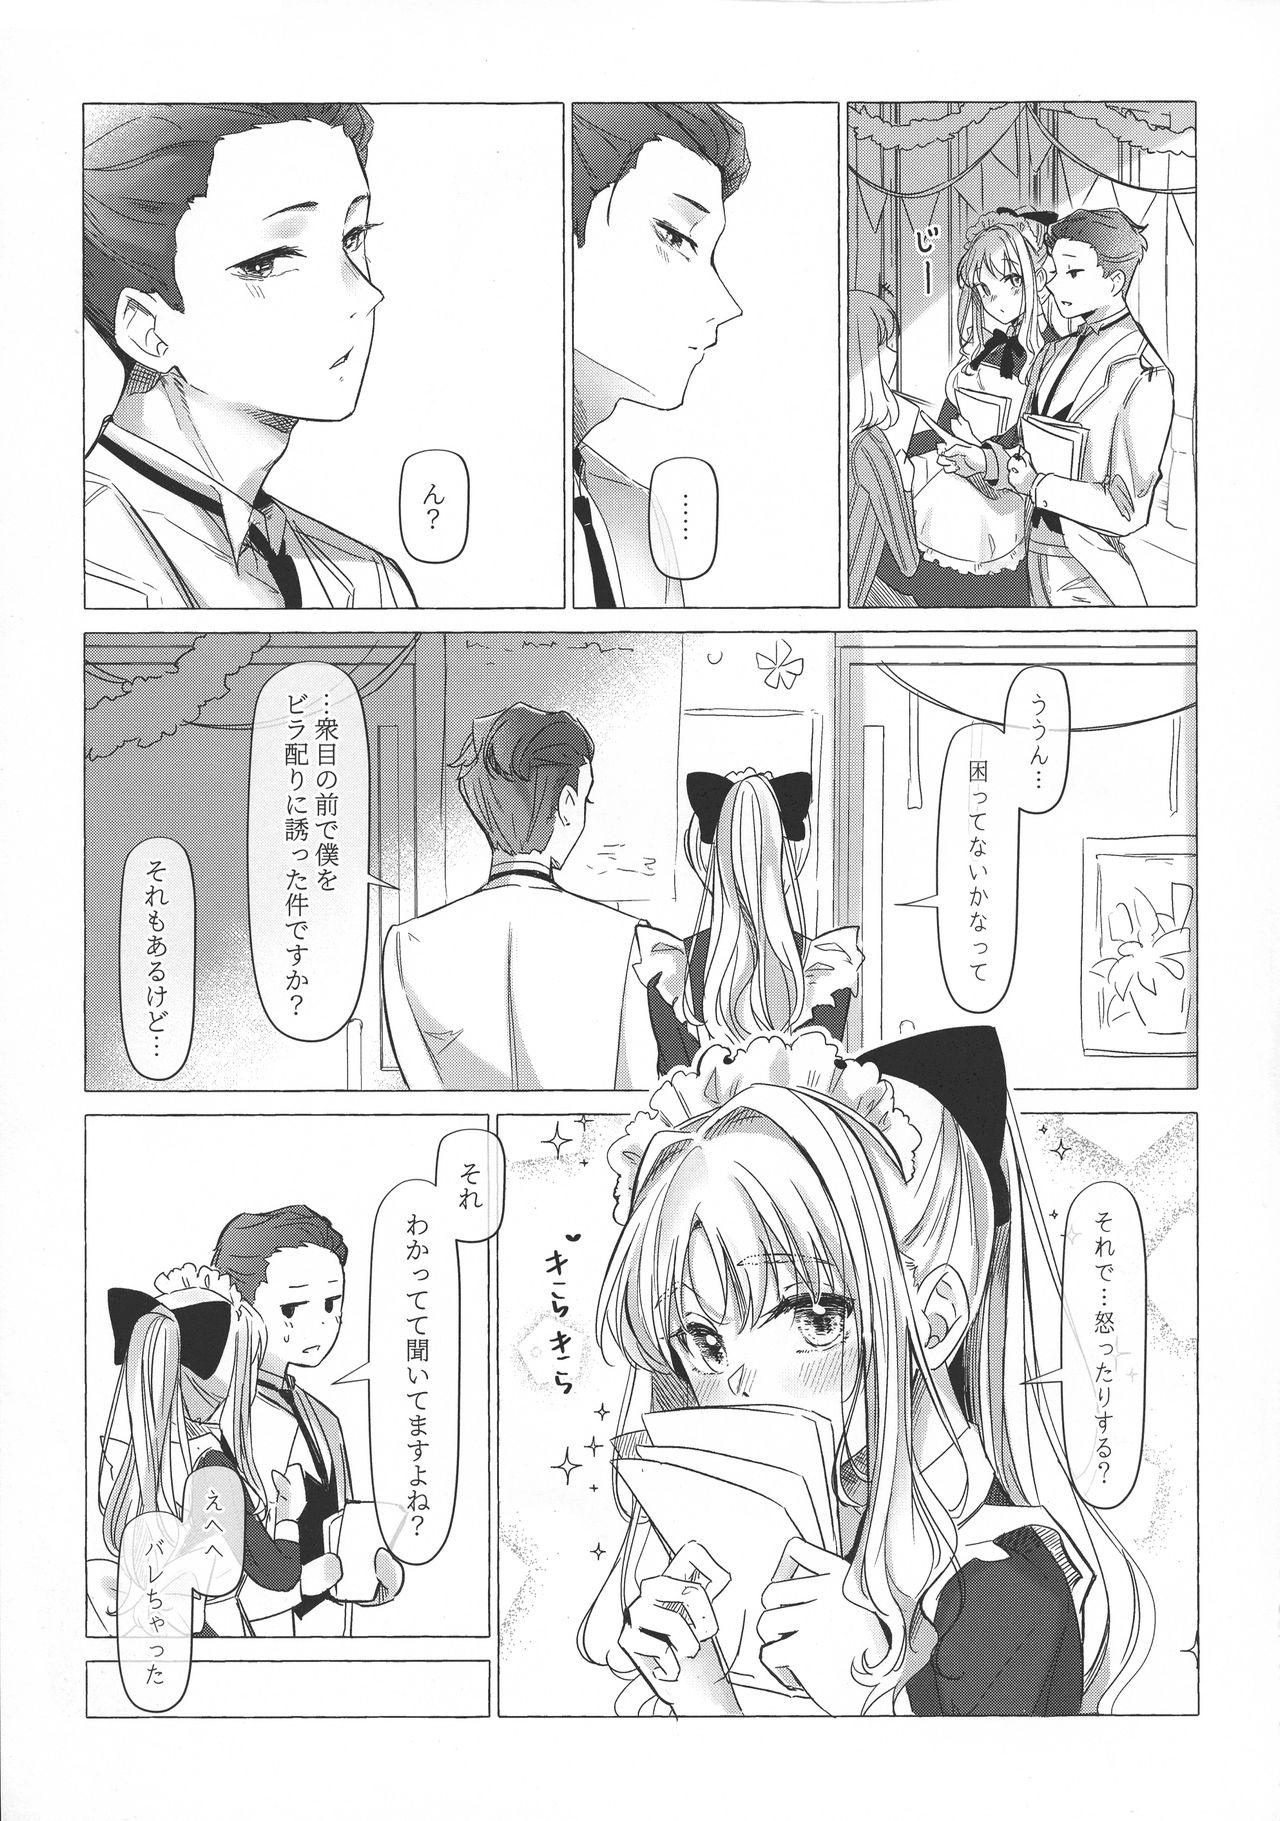 Hot Couple Sex 満心総意の躾 - Darling in the franxx Cumming - Page 6